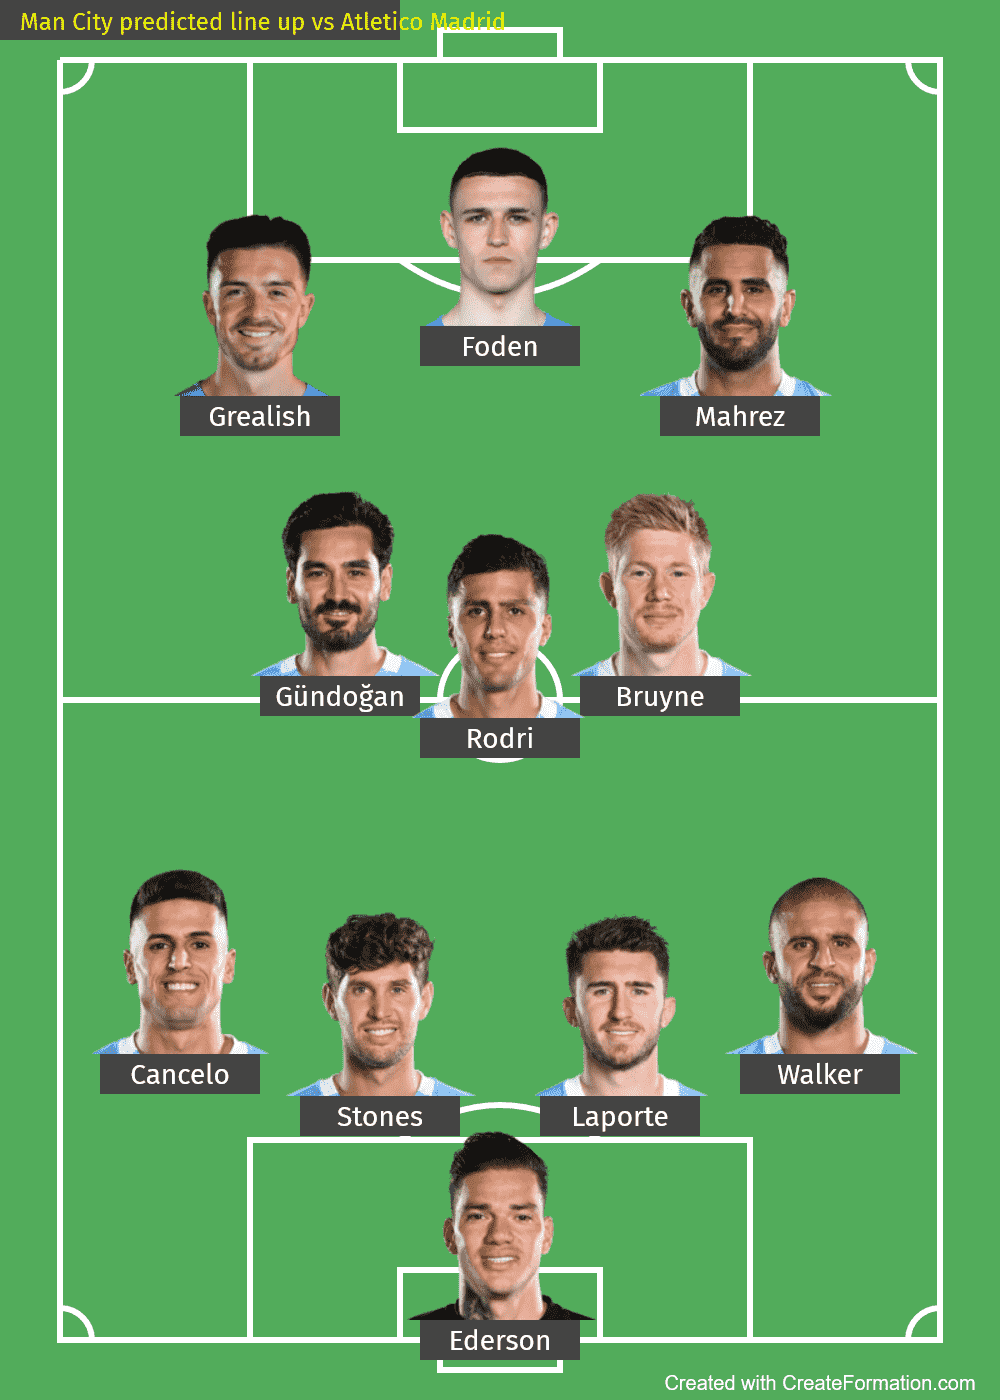 Man City predicted line up vs Atletico Madrid-2022-2nd leg-UCL